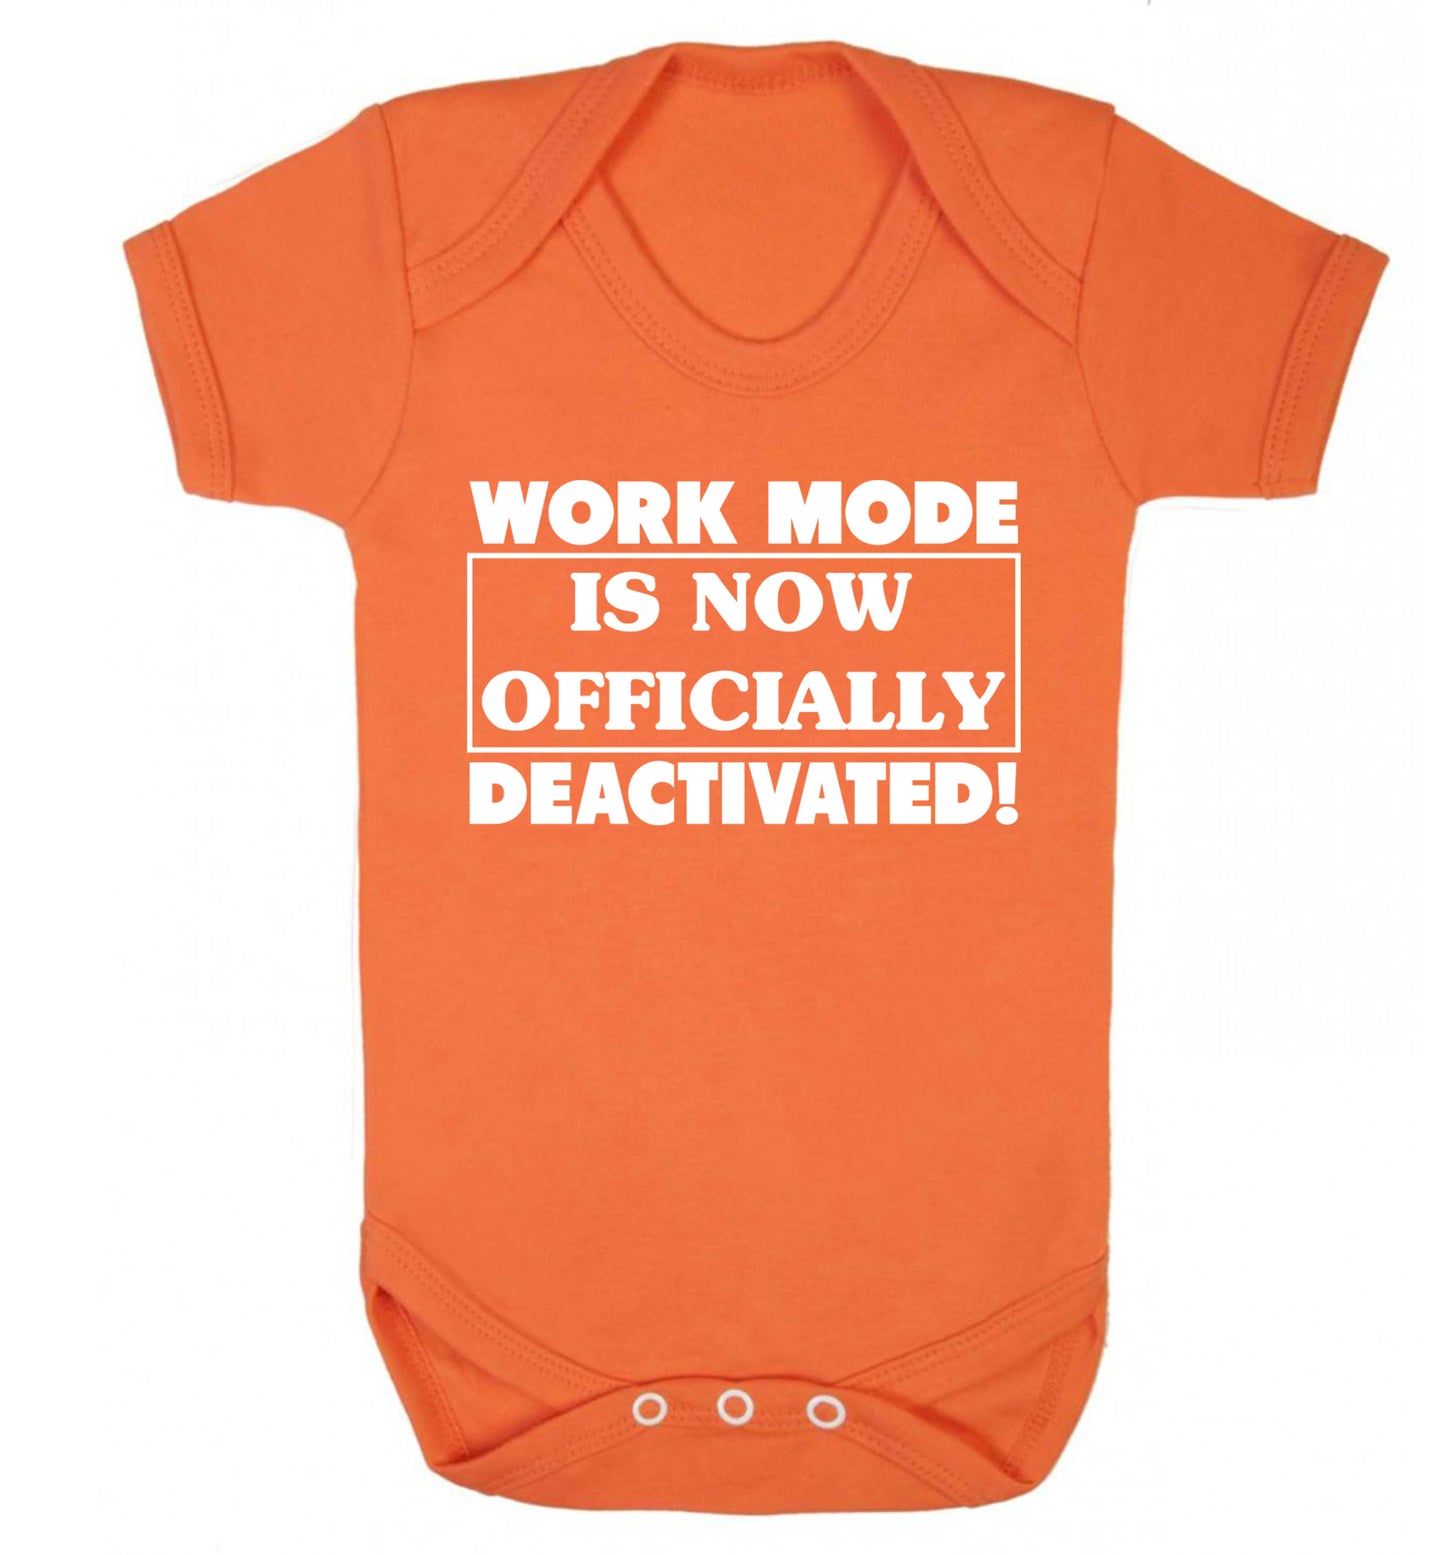 Work mode is now officially deactivated Baby Vest orange 18-24 months